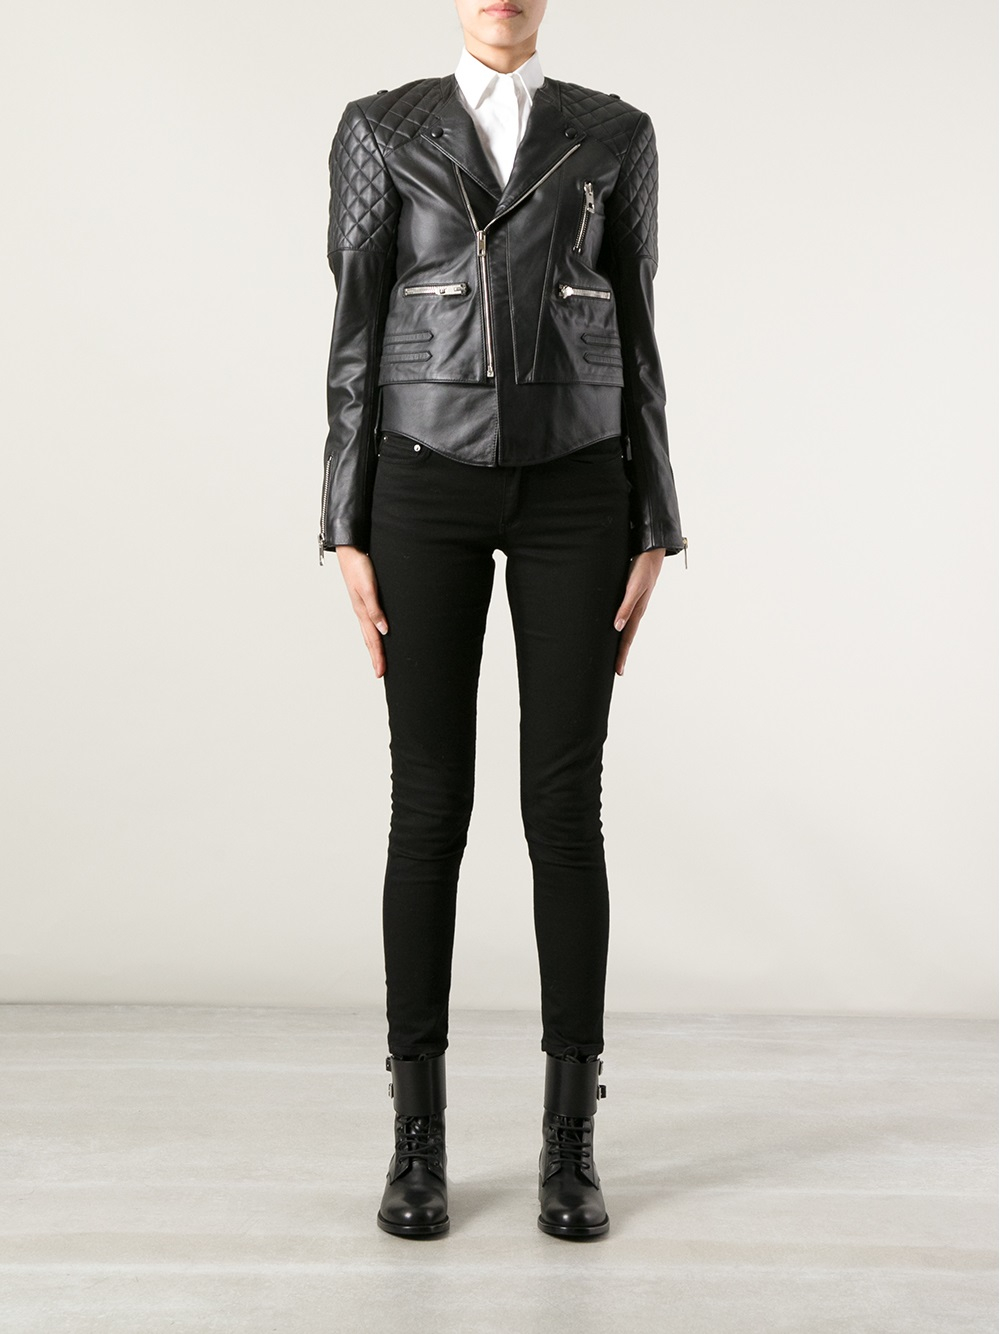 Balenciaga Quilted Leather Biker Jacket in Black - Lyst